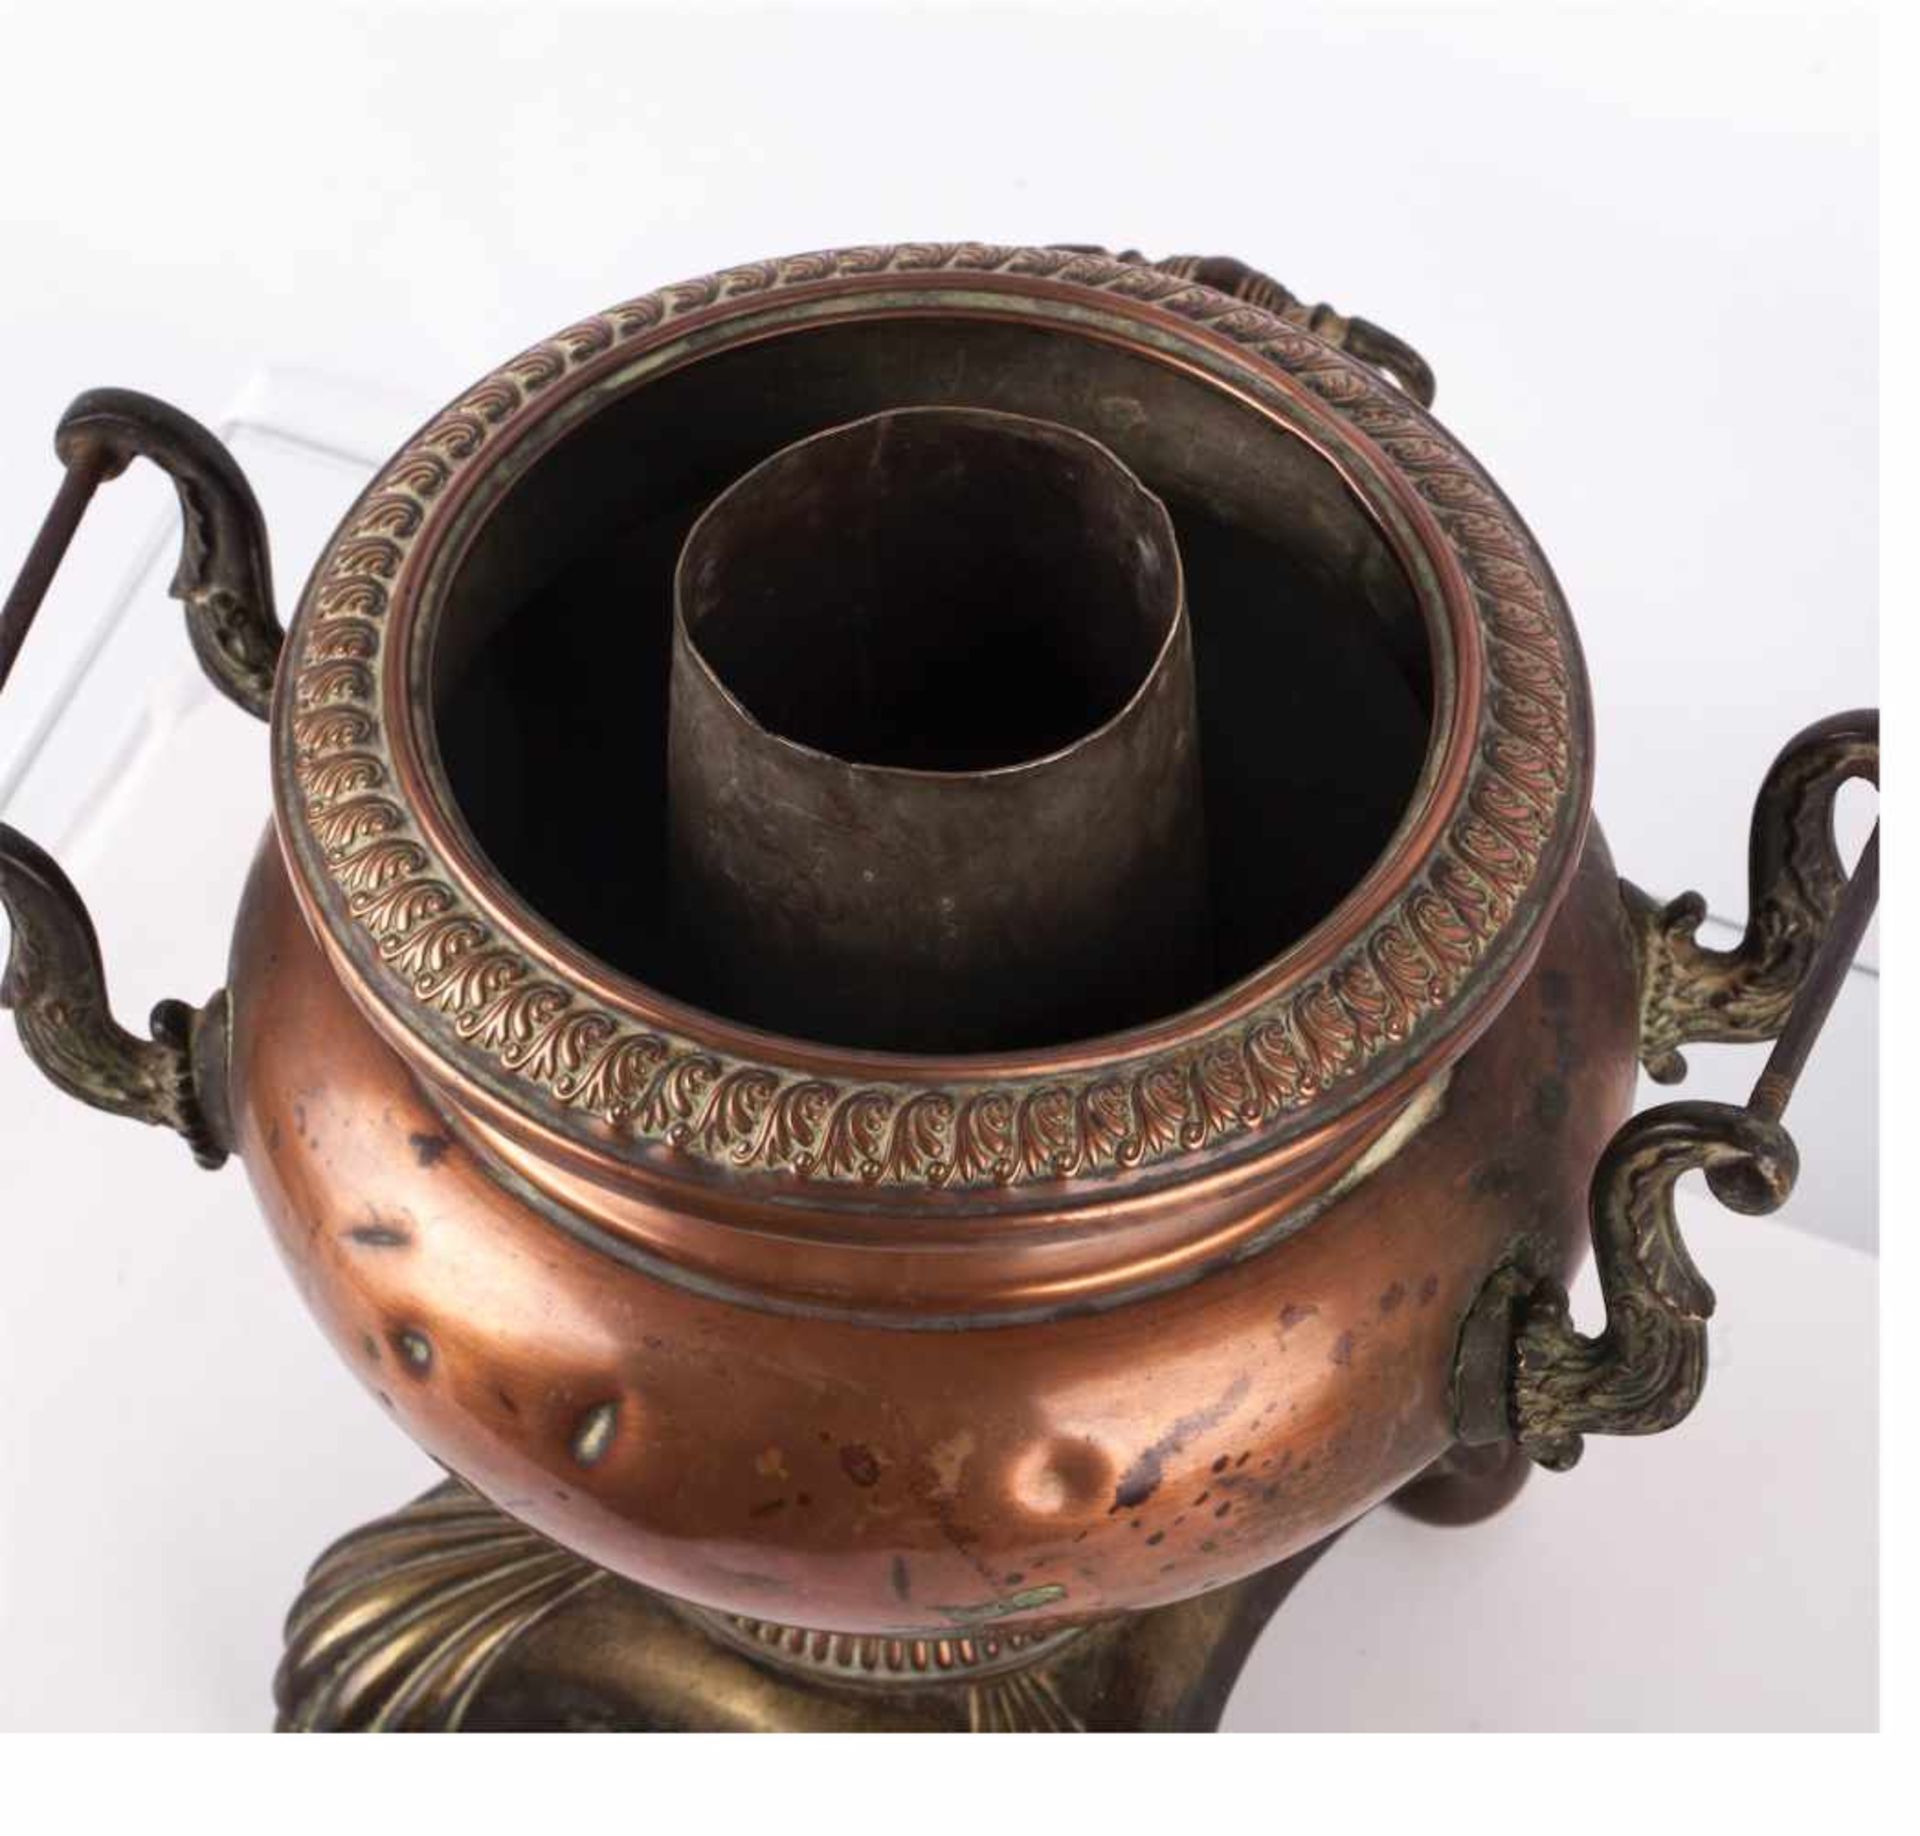 Small samovar in the shape of a vaseSmall samovar in the shape of a vase. Copper, cast, chasing, - Bild 4 aus 6